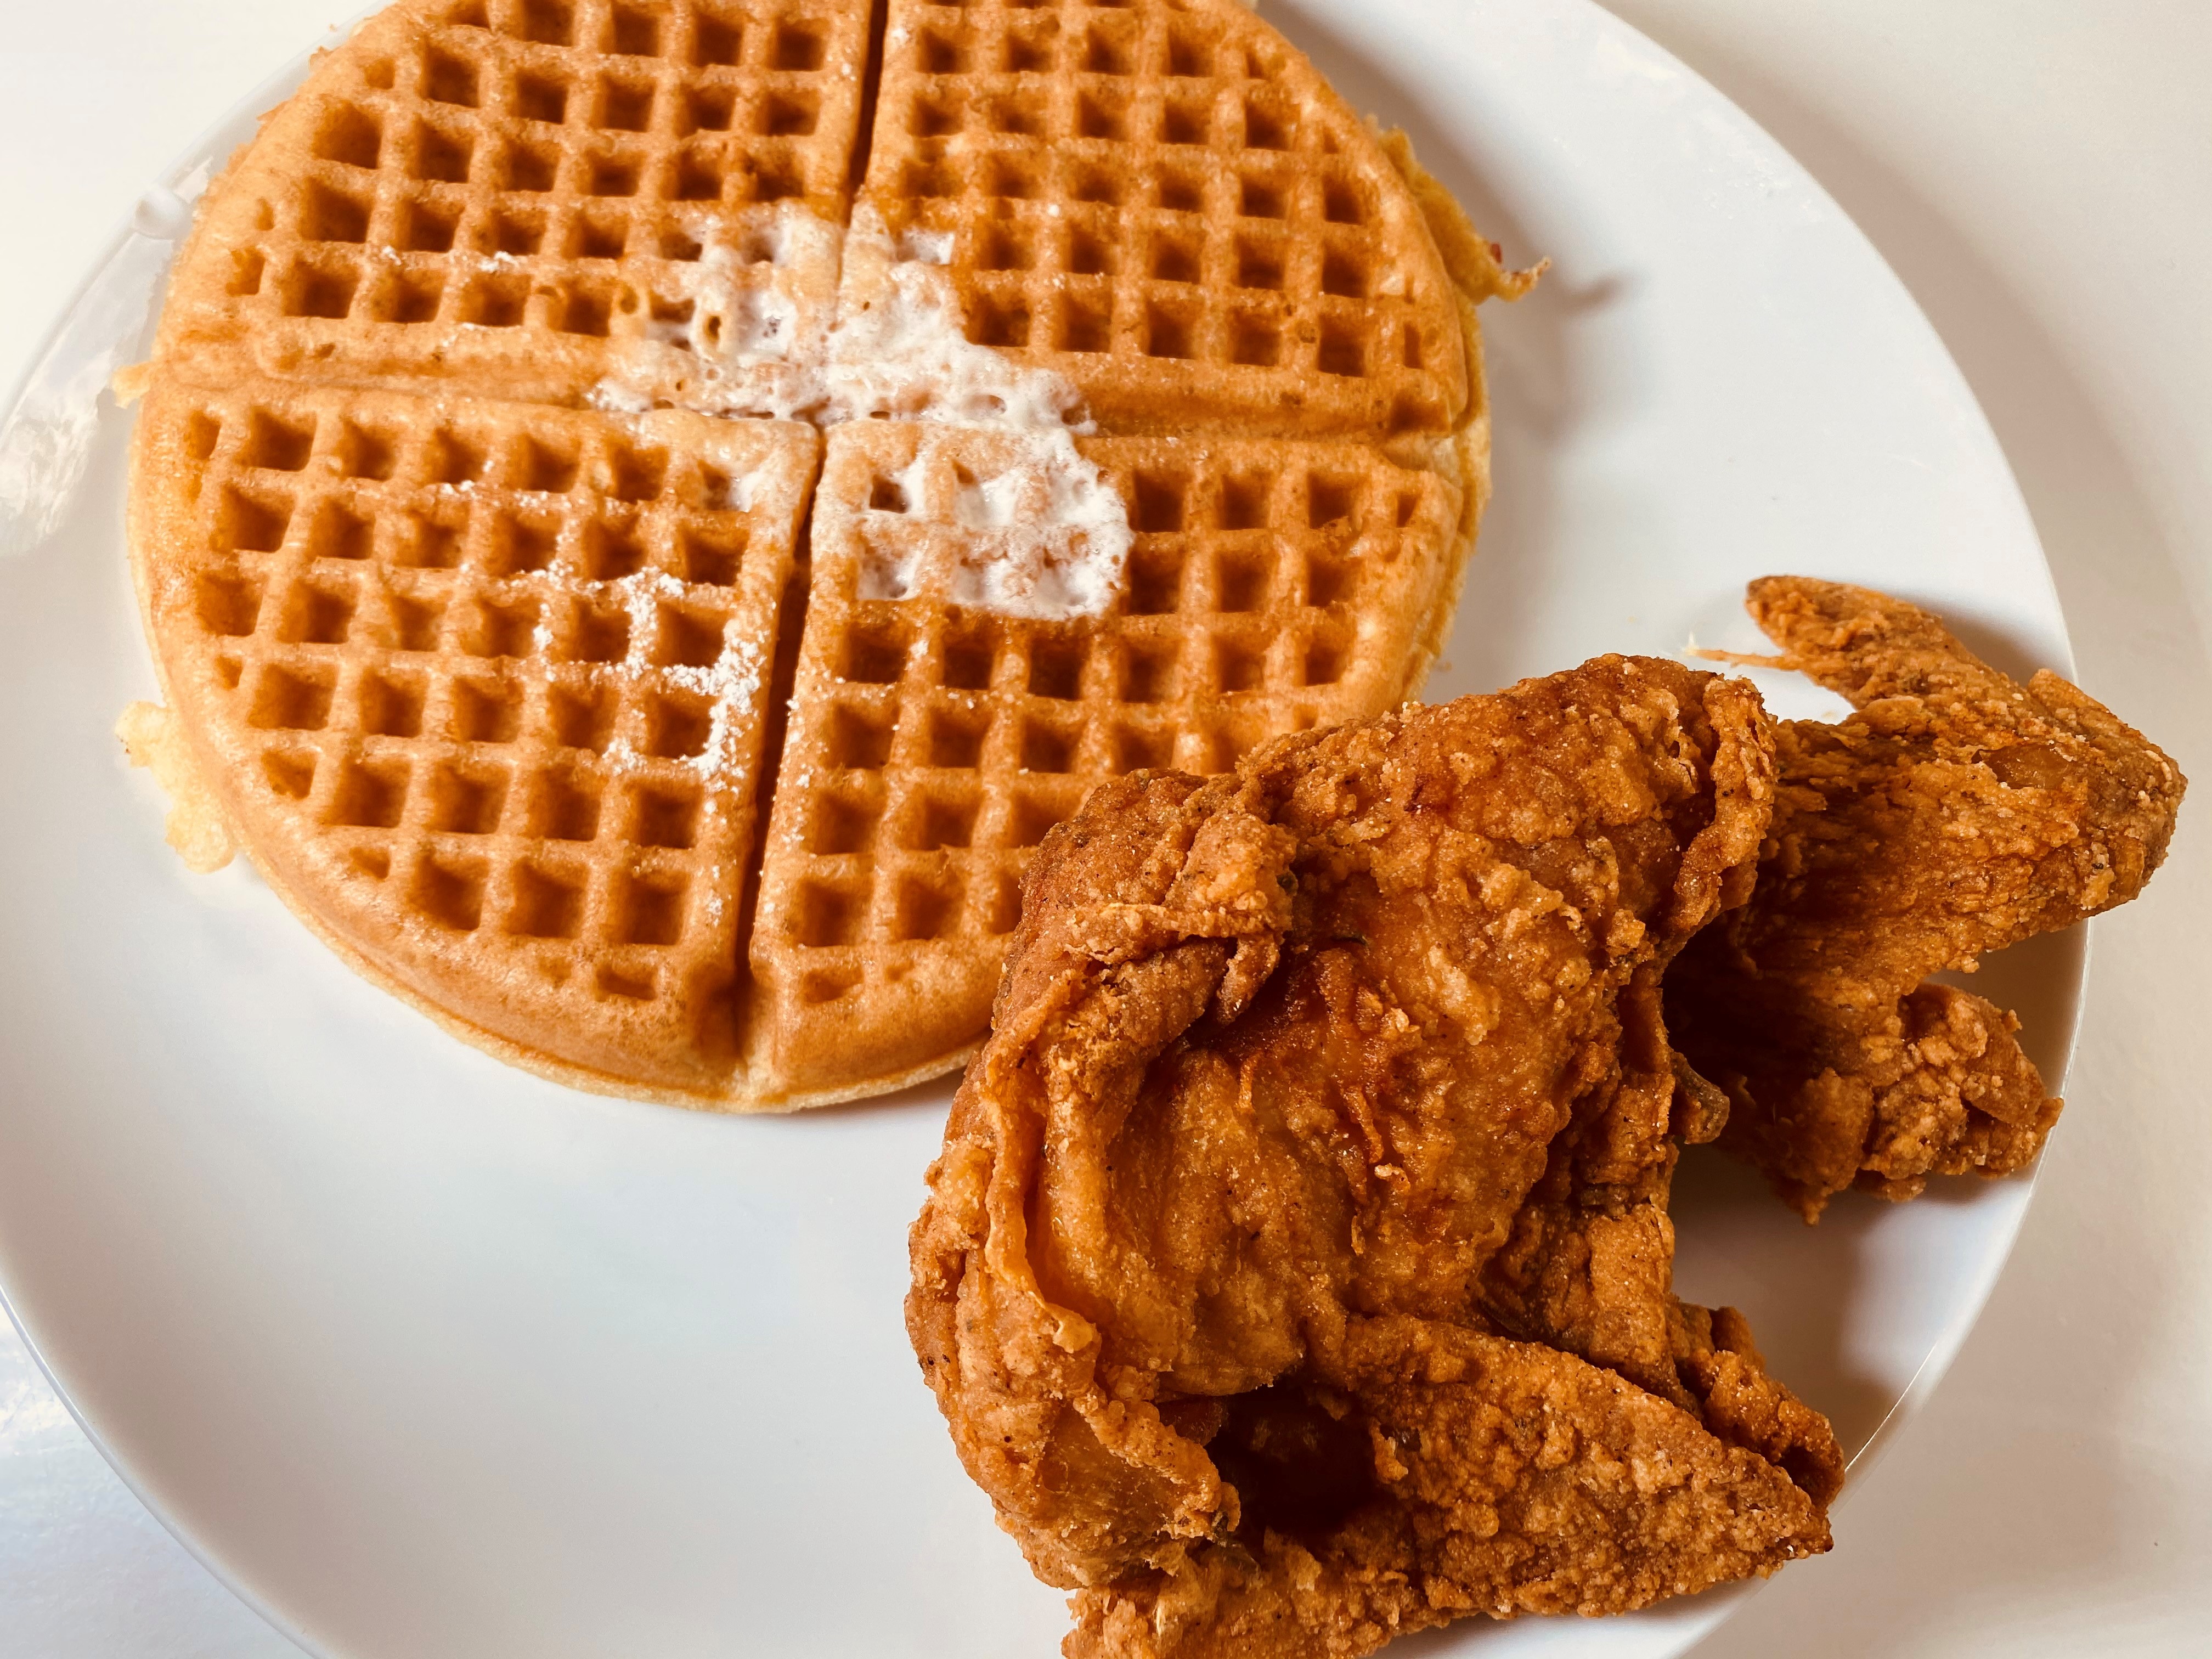 Best Atlanta takeout: Chicken and Waffles in Park